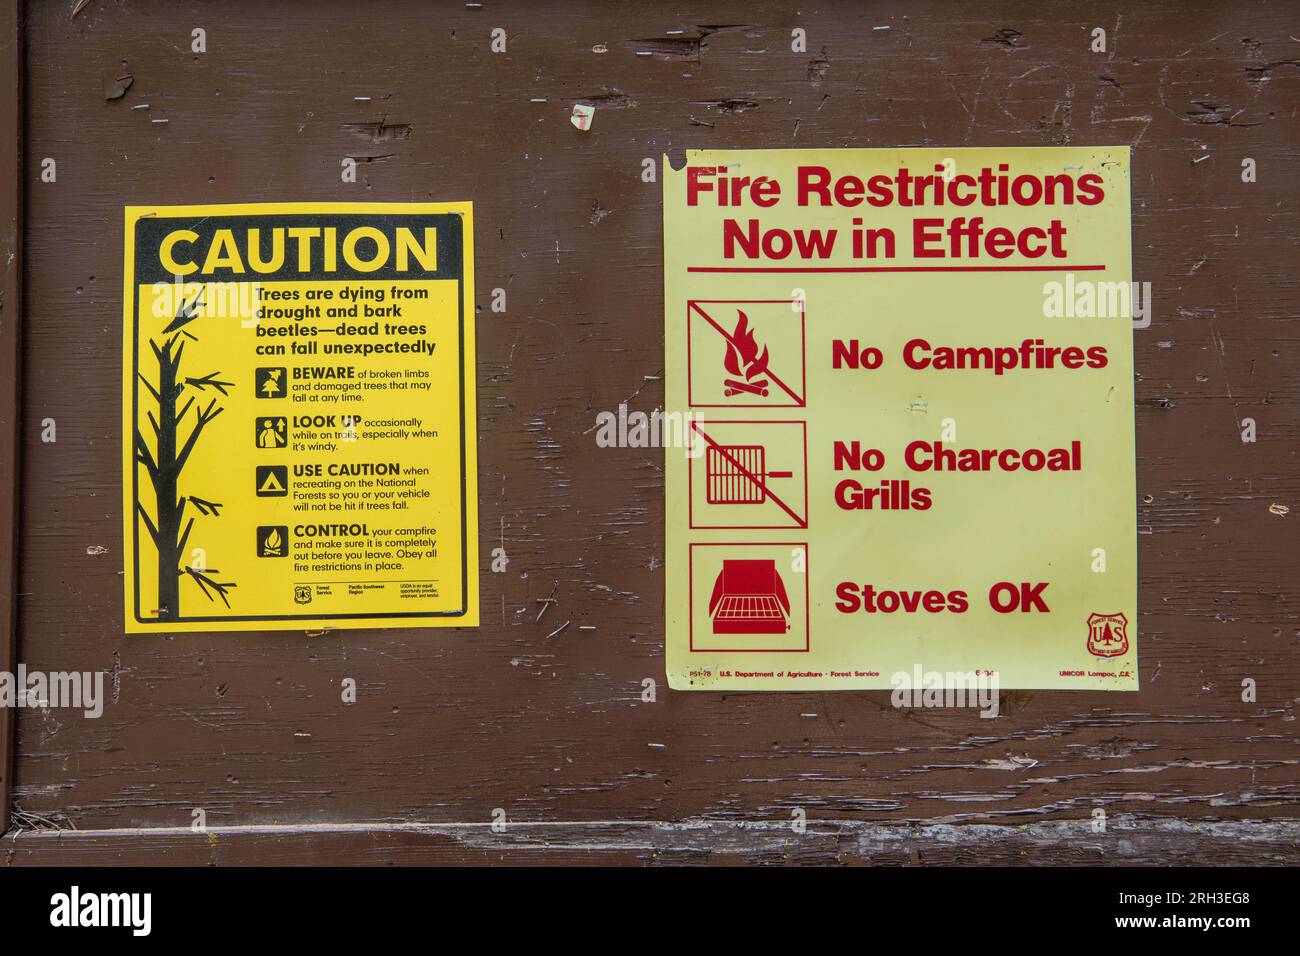 Warning signs in the California wilderness cautioning about Fire restrictions and dying trees. Stock Photo